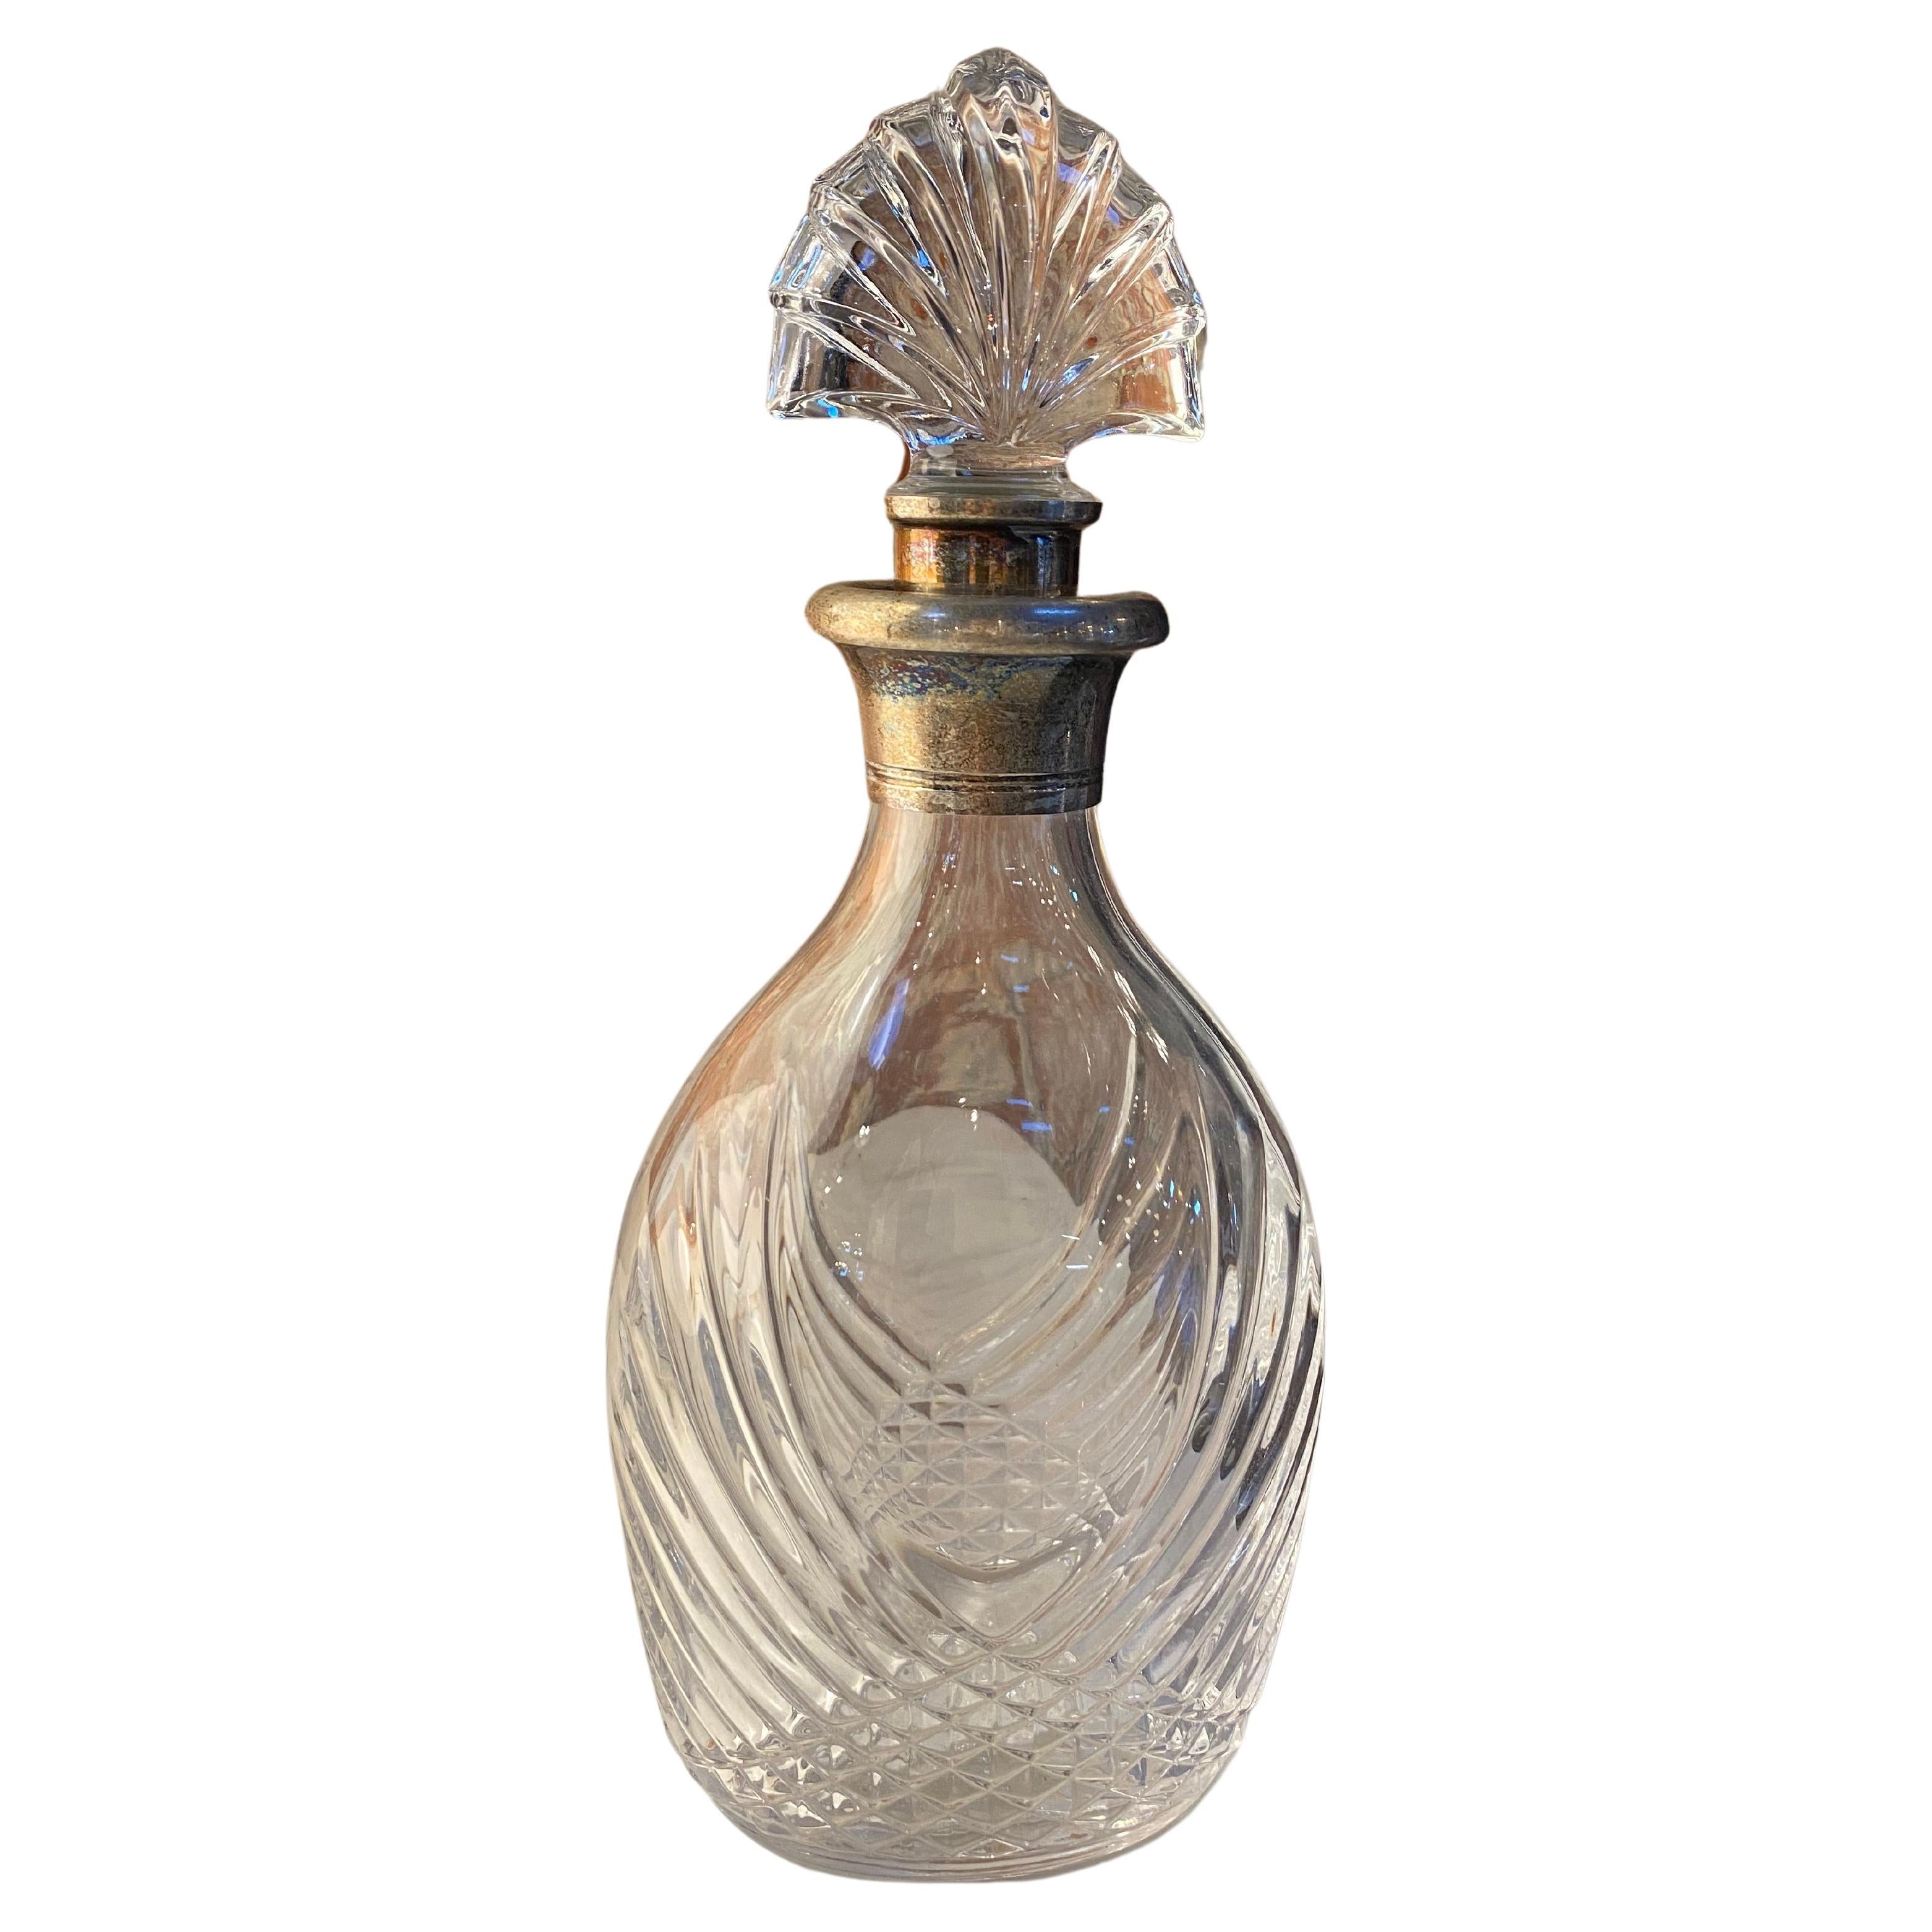 Decorative Italian Crystal Decanter/Bottle 1950s For Sale